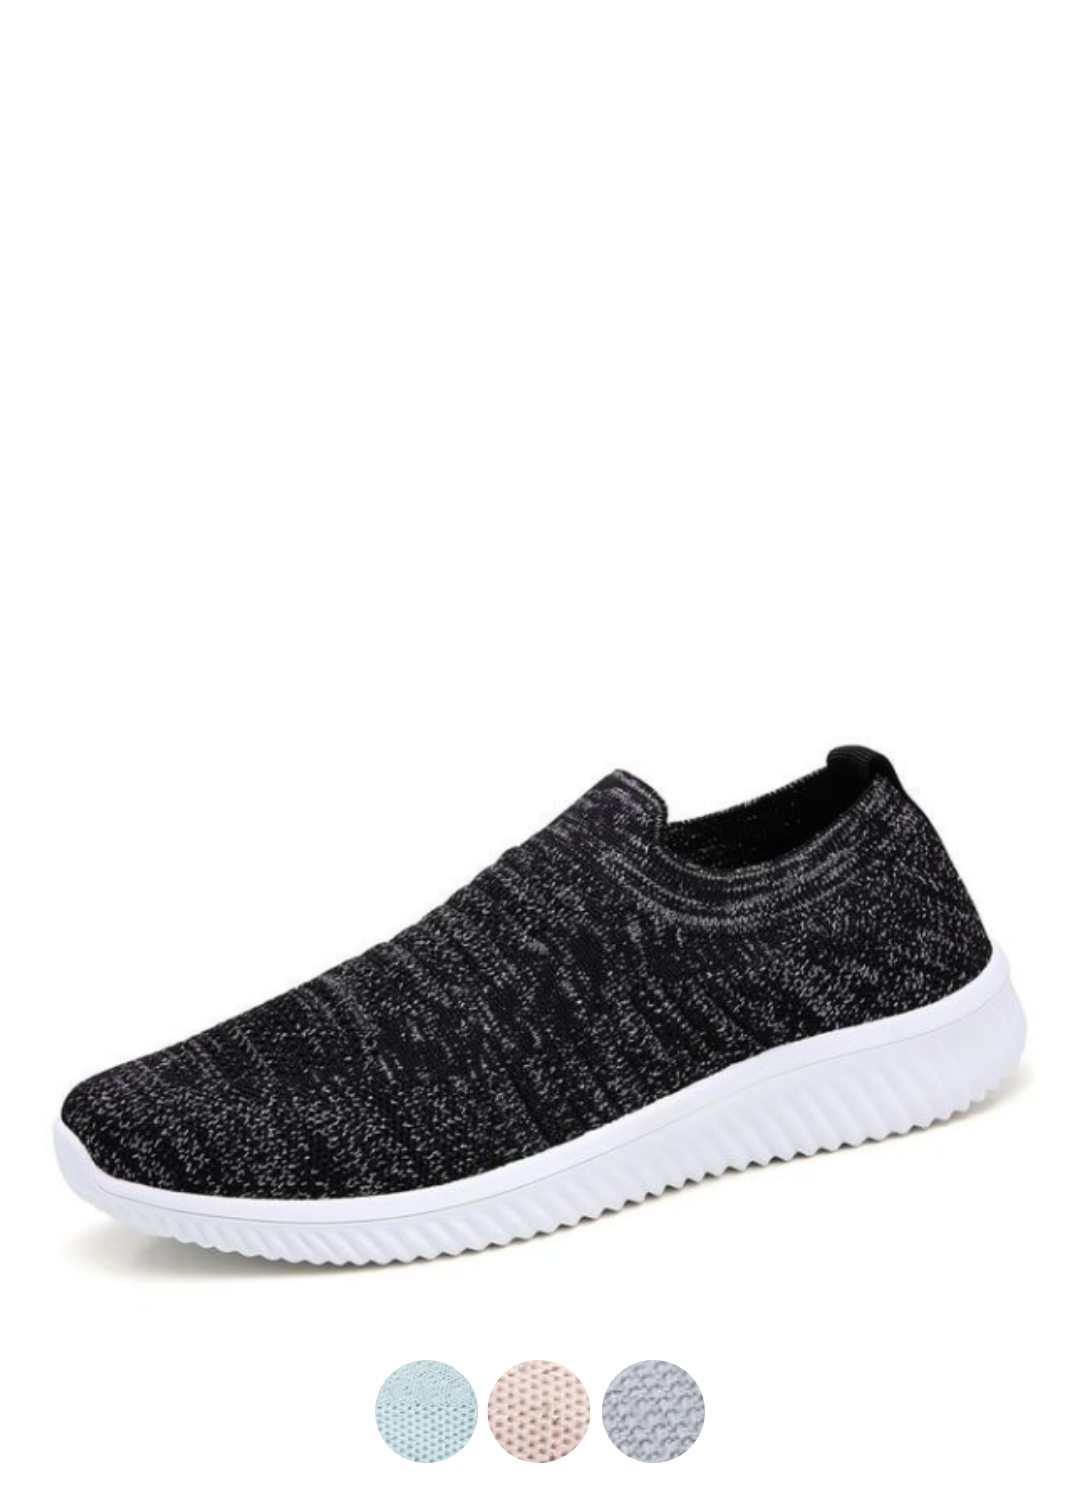 Gloria Women's Slip-On Shoes | Ultrasellershoes.com – USS® Shoes